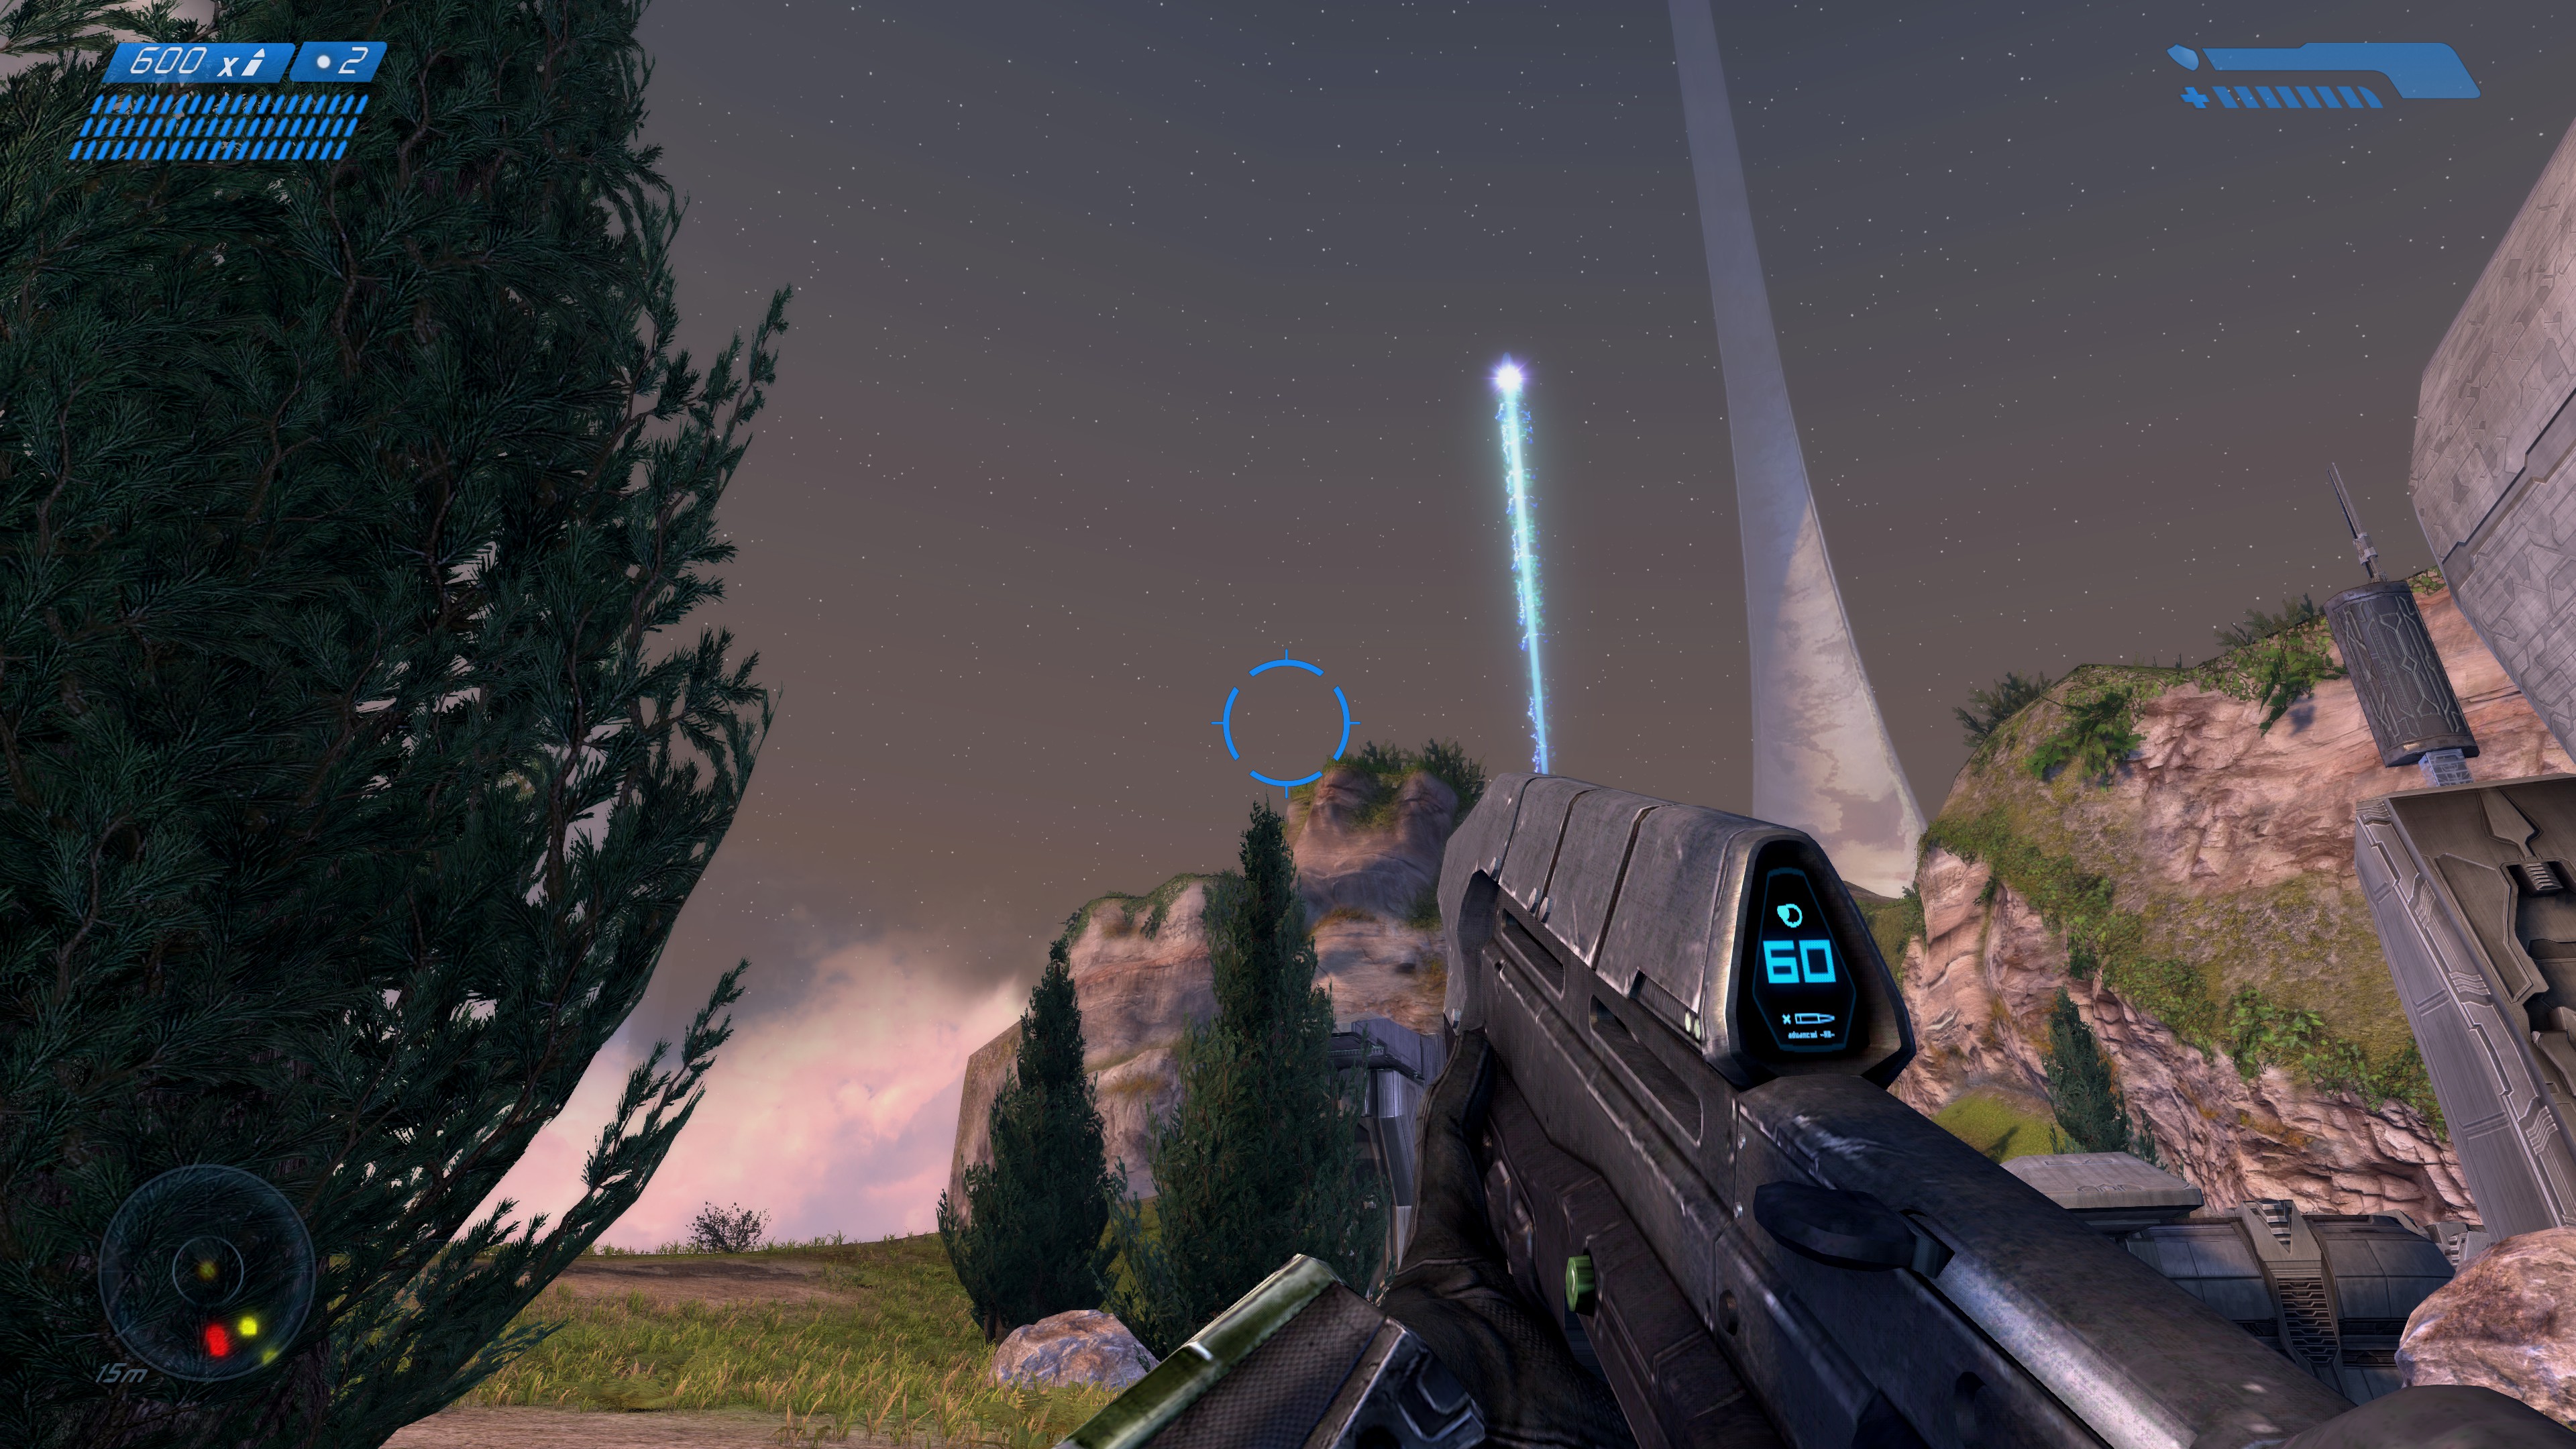 halo combat evolved for pc